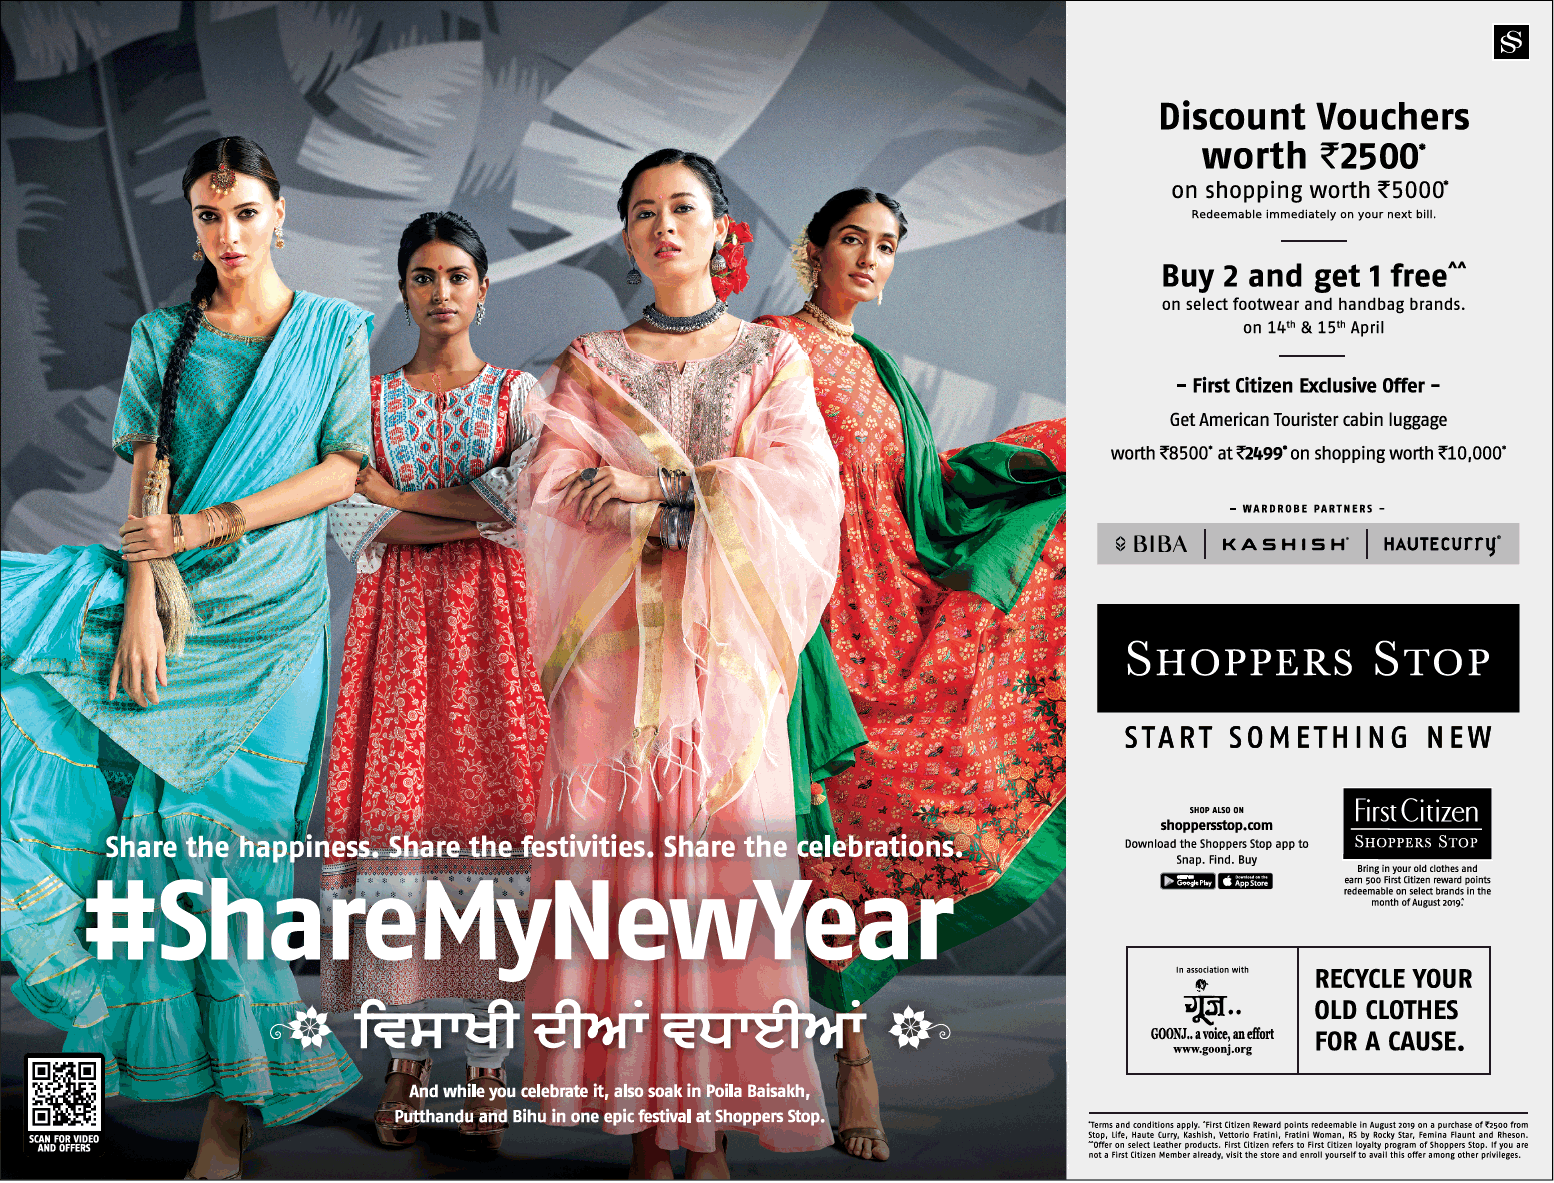 shoppers-stop-share-my-new-year-ad-delhi-times-13-04-2019.png